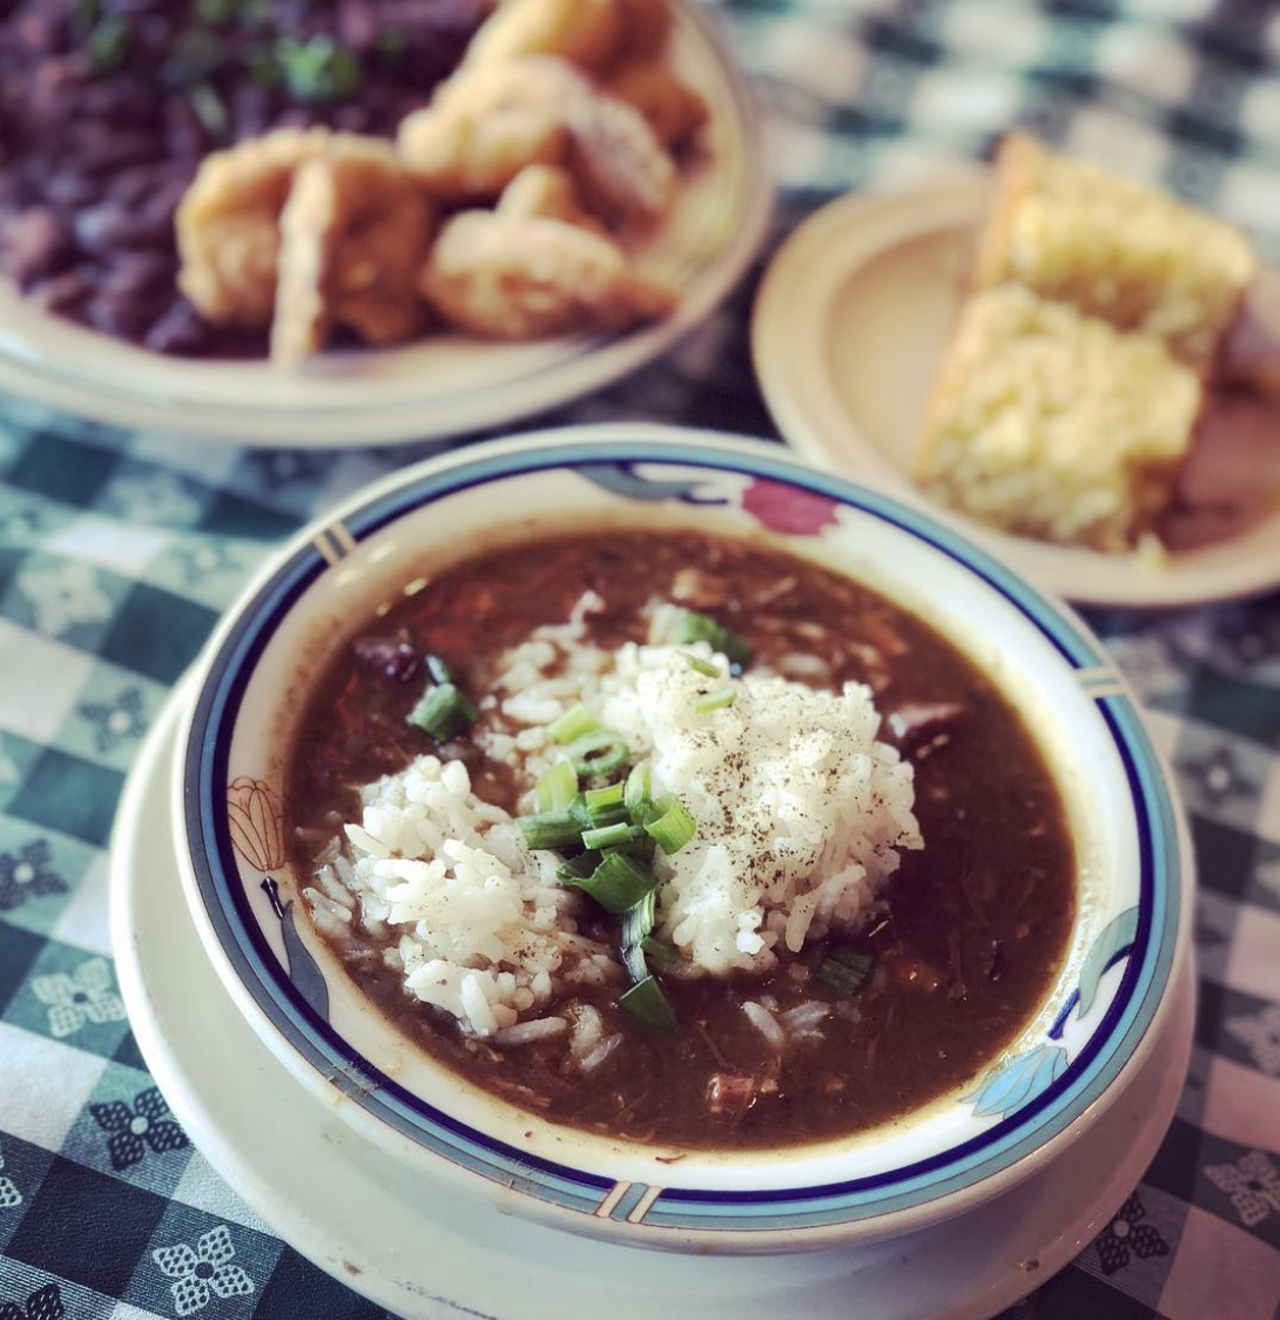 Ma Harper's Creole Kitchen’s Gumbo
1816 N New Braunfels Ave, (210) 226-2200, facebook.com/maharperscreolekitchen
When it comes to Creole cooking, it’s hard to argue with a bowl of expertly prepared sausage and chicken-breast-laced gumbo. Enter Ma Harper, and her tried and true recipe, which has stood the test of time in San Antonio for more than 20 years. 
Photo via Instagram /  texas_made_eats